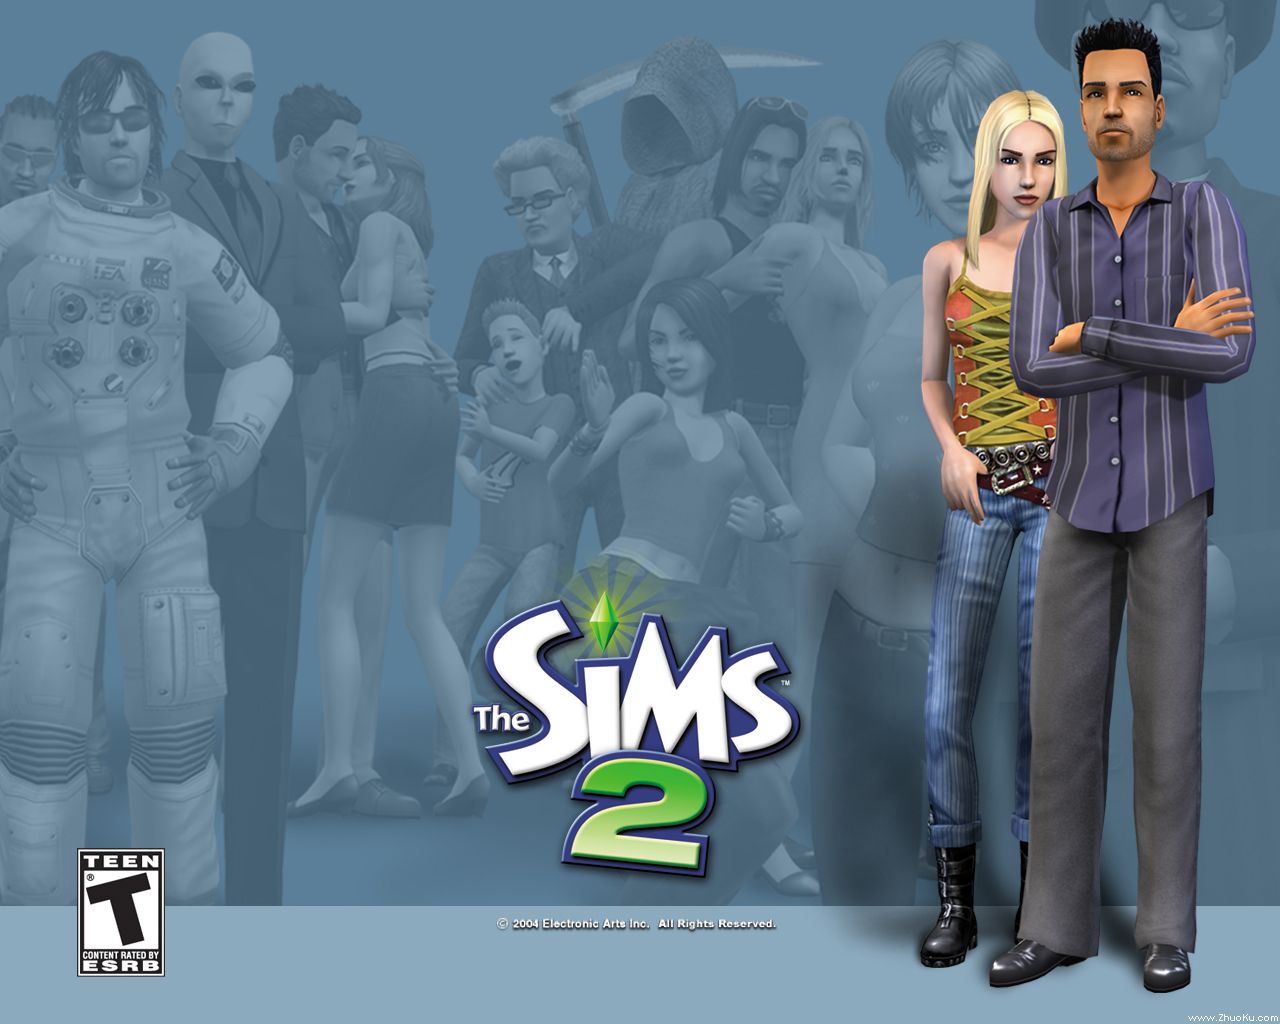 ģ2(The Sims 2)ֽ(ֽ18)